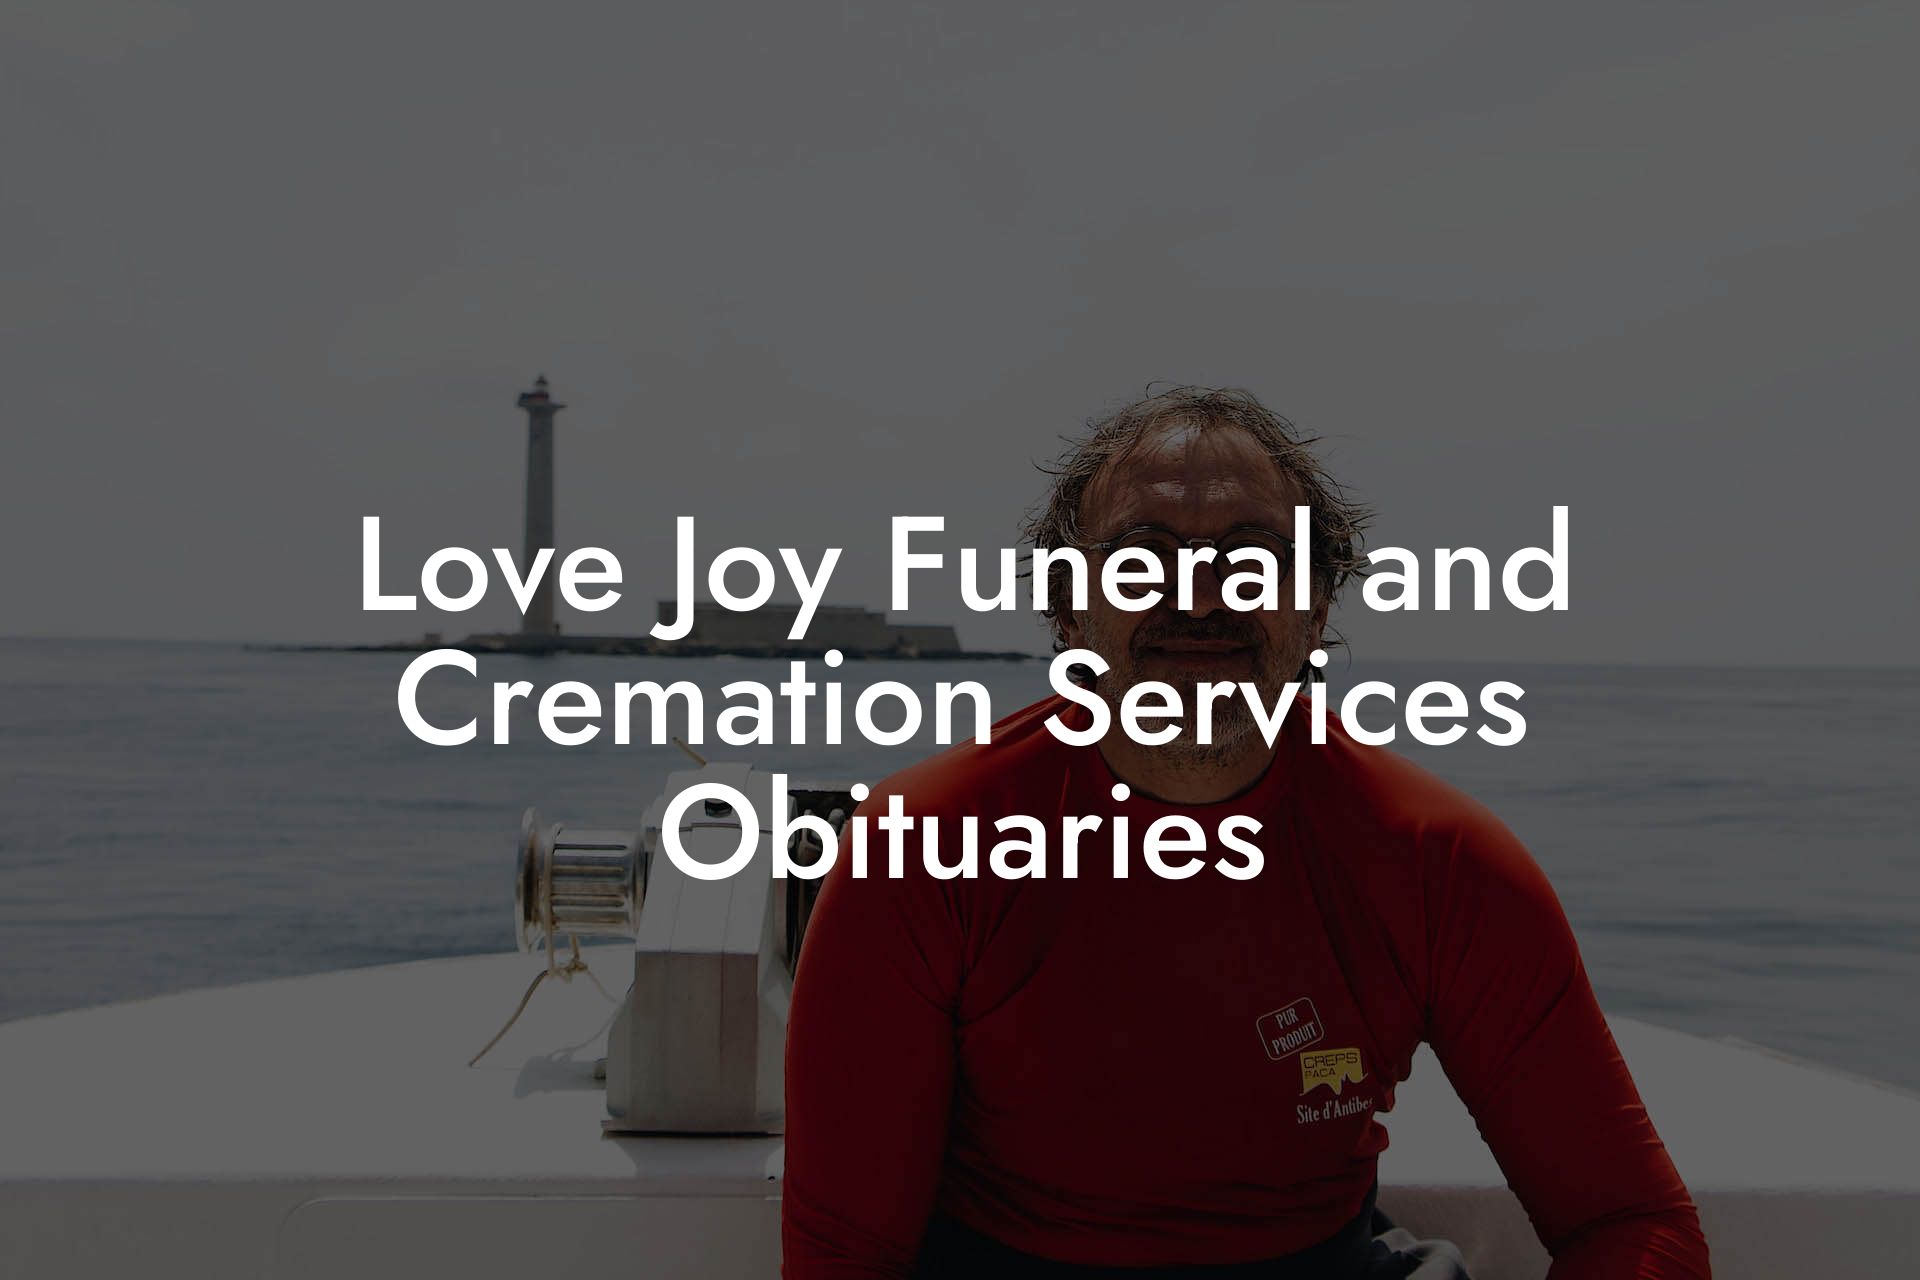 Love Joy Funeral and Cremation Services Obituaries